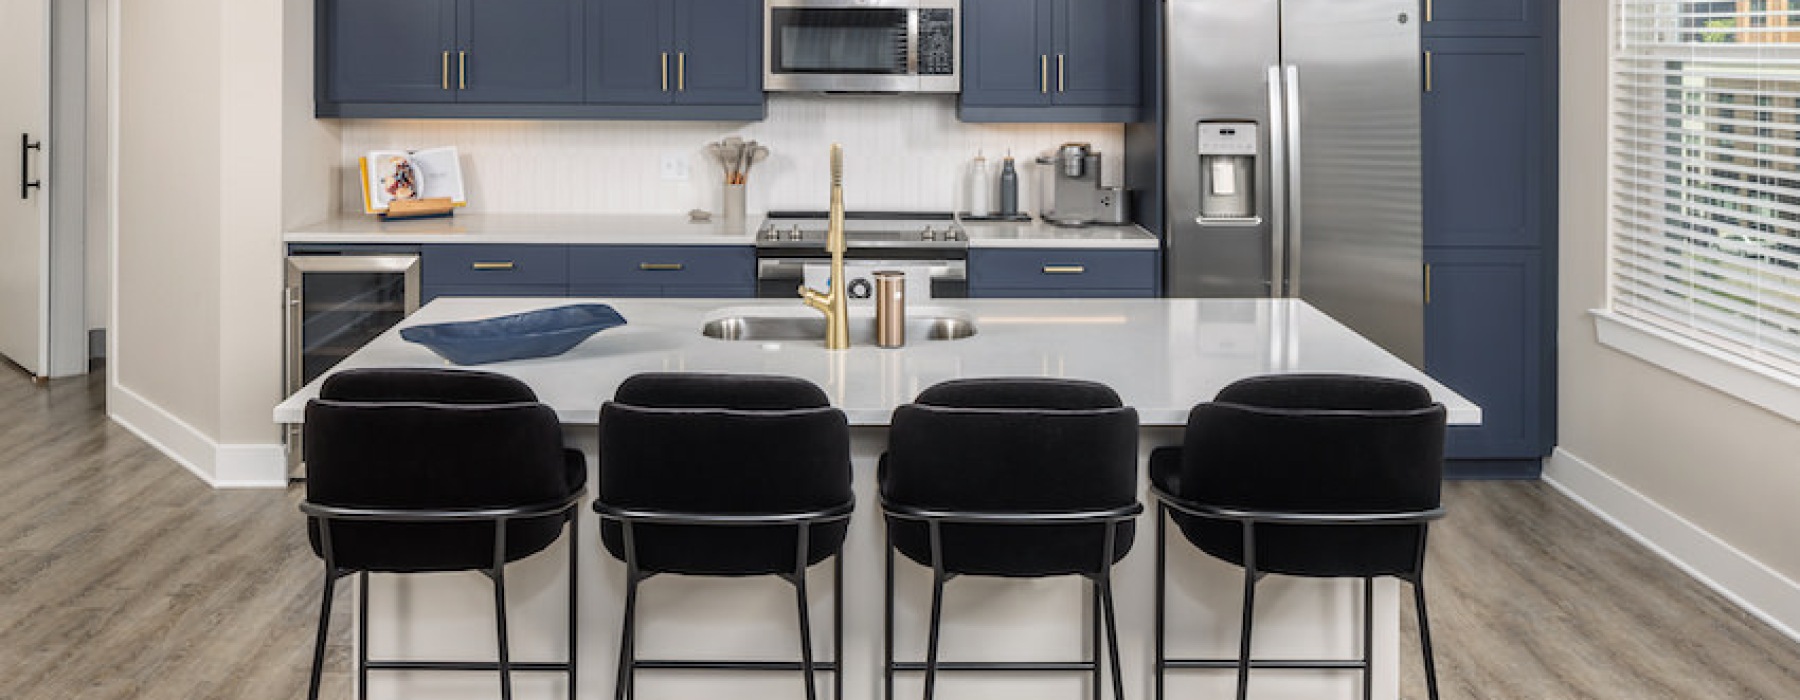 Blue kitchen cabinets with island and bar stools